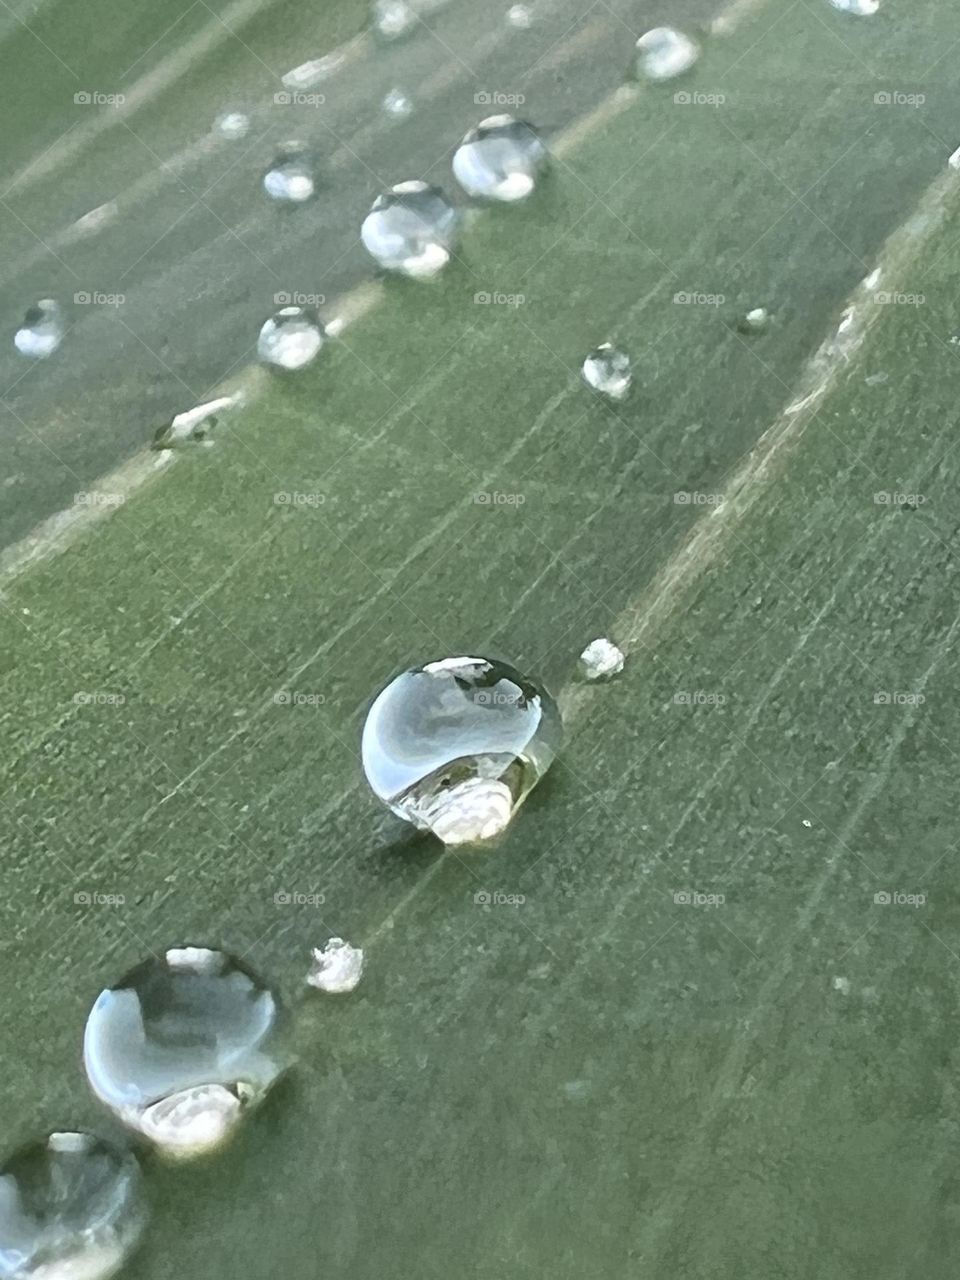 Waterdrops on a leave